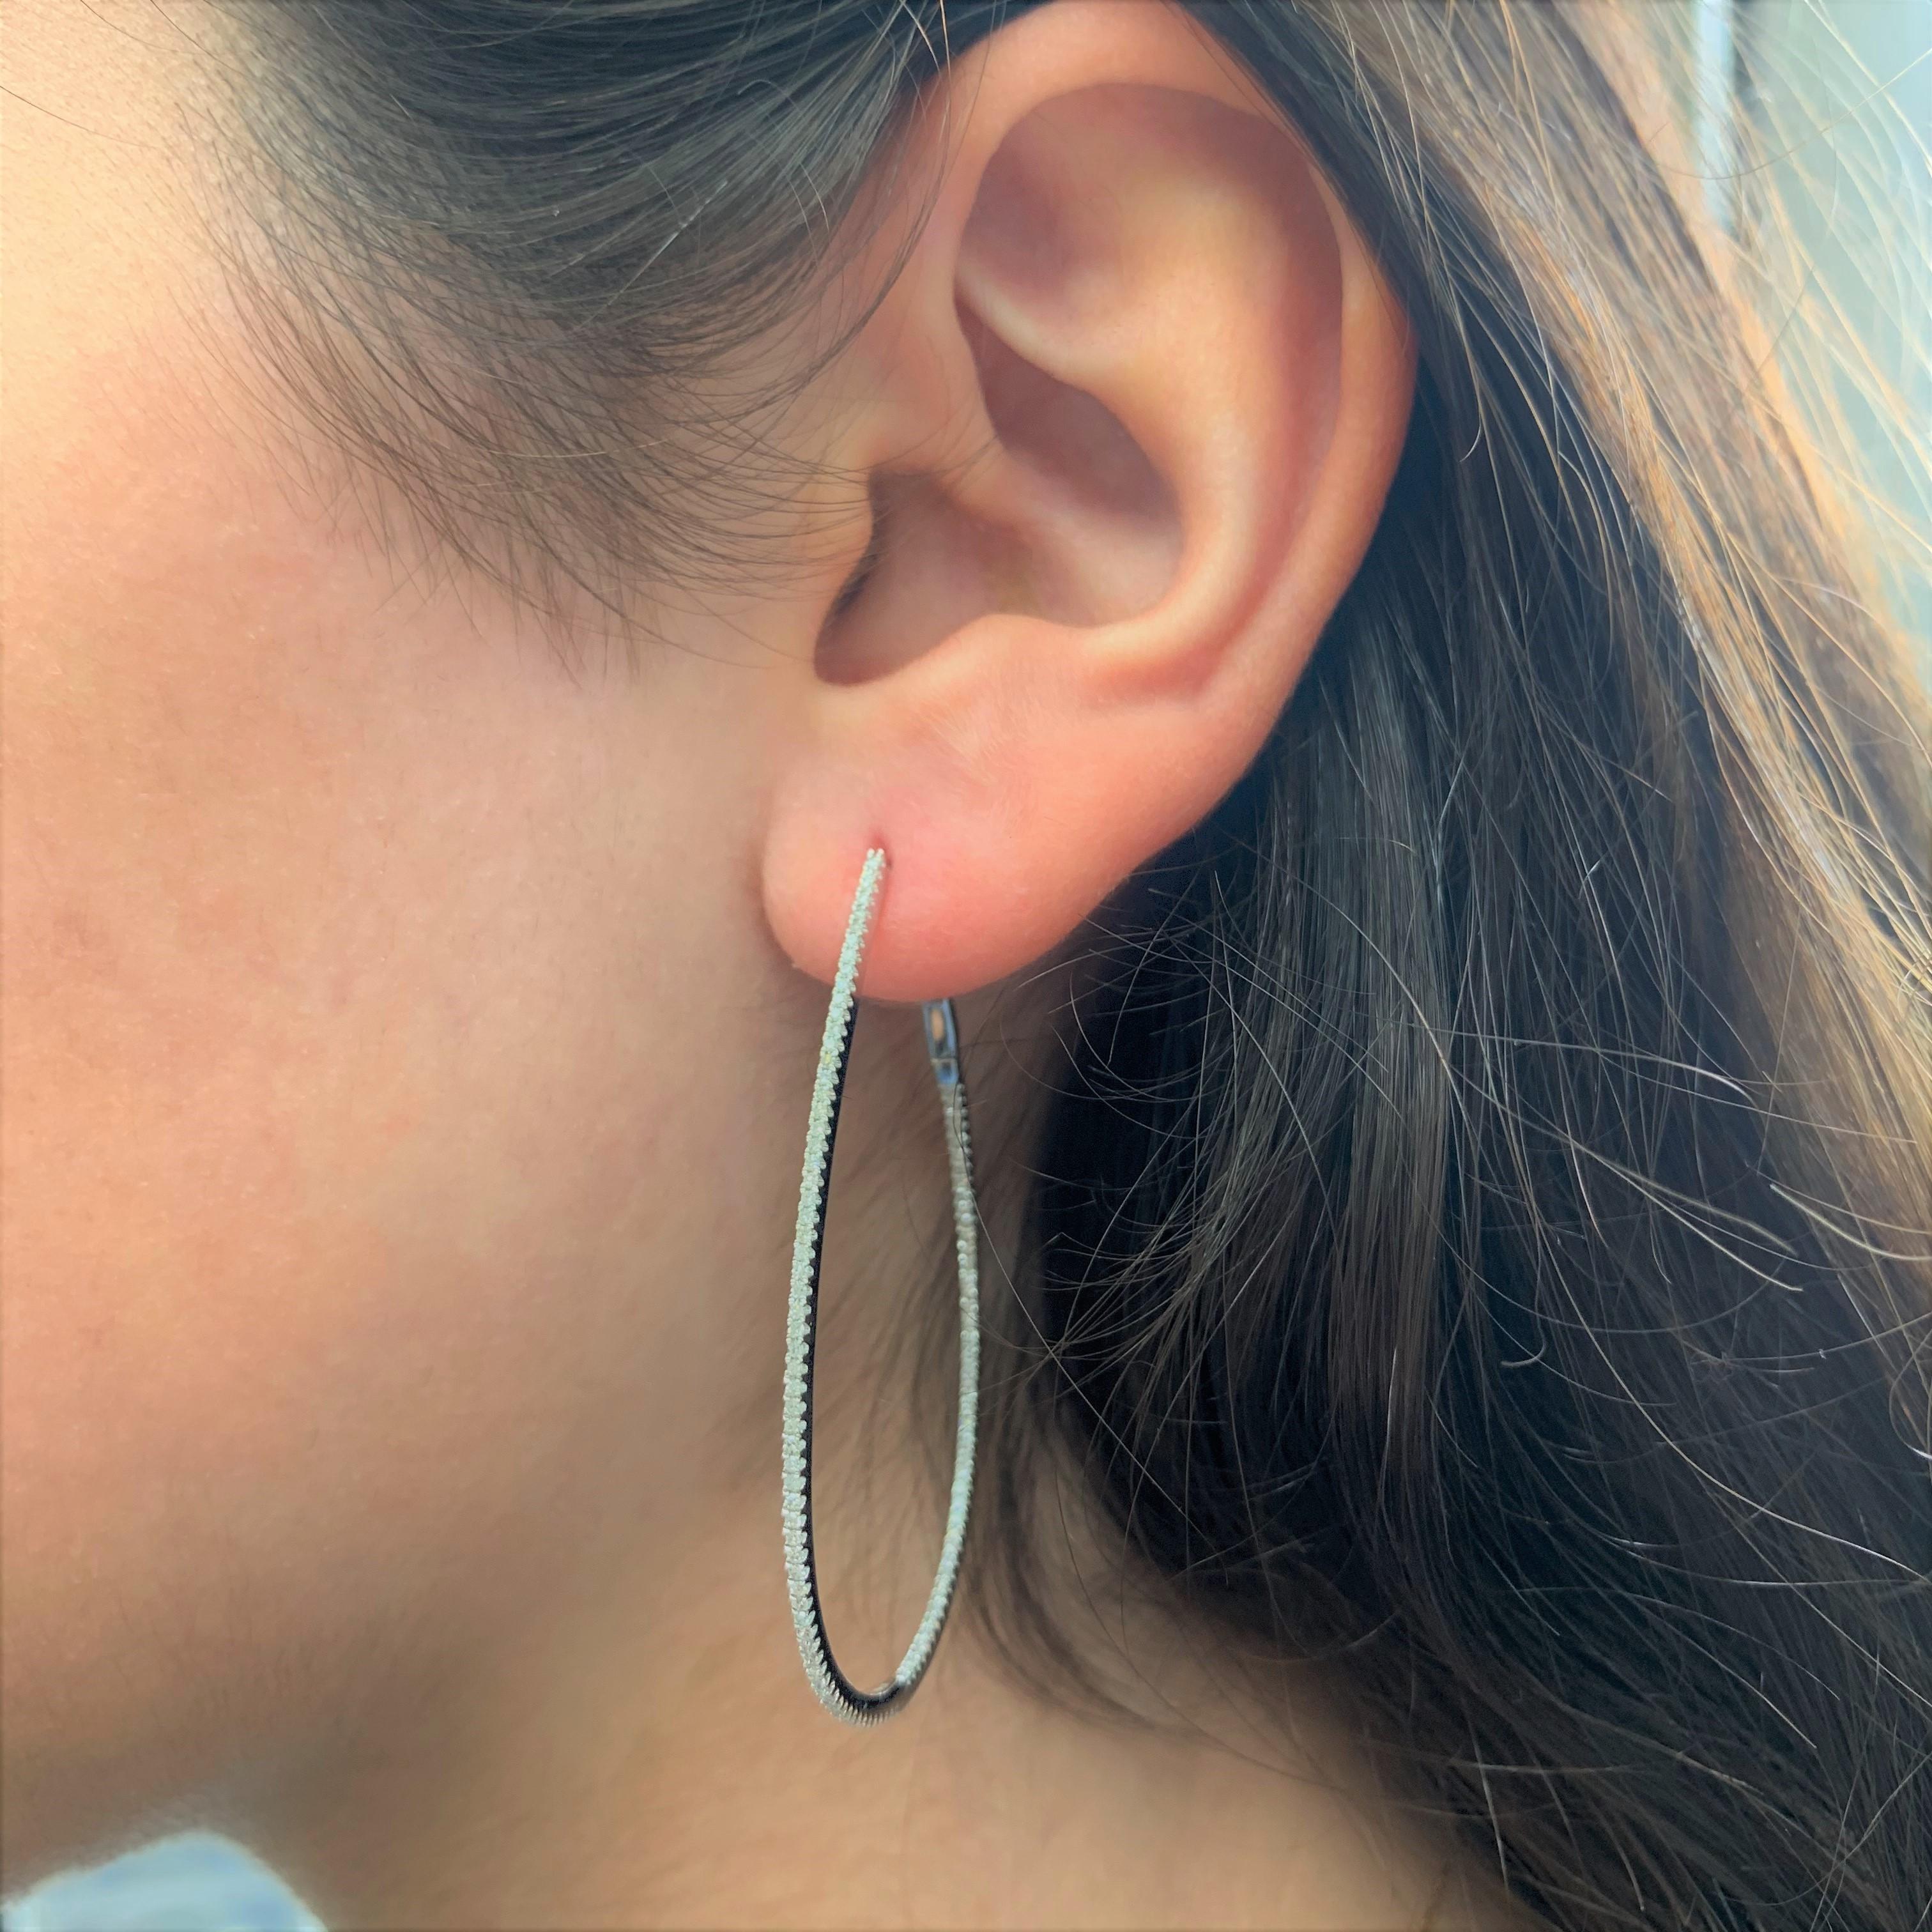 Set your lobes aglow in the classic shimmer and shine of these luxurious pear shape skinny hoop earrings! A dazzling array of diamonds fire up and down the design crafted from 14k white, rose or yellow gold. Lever backs offer easy application so you